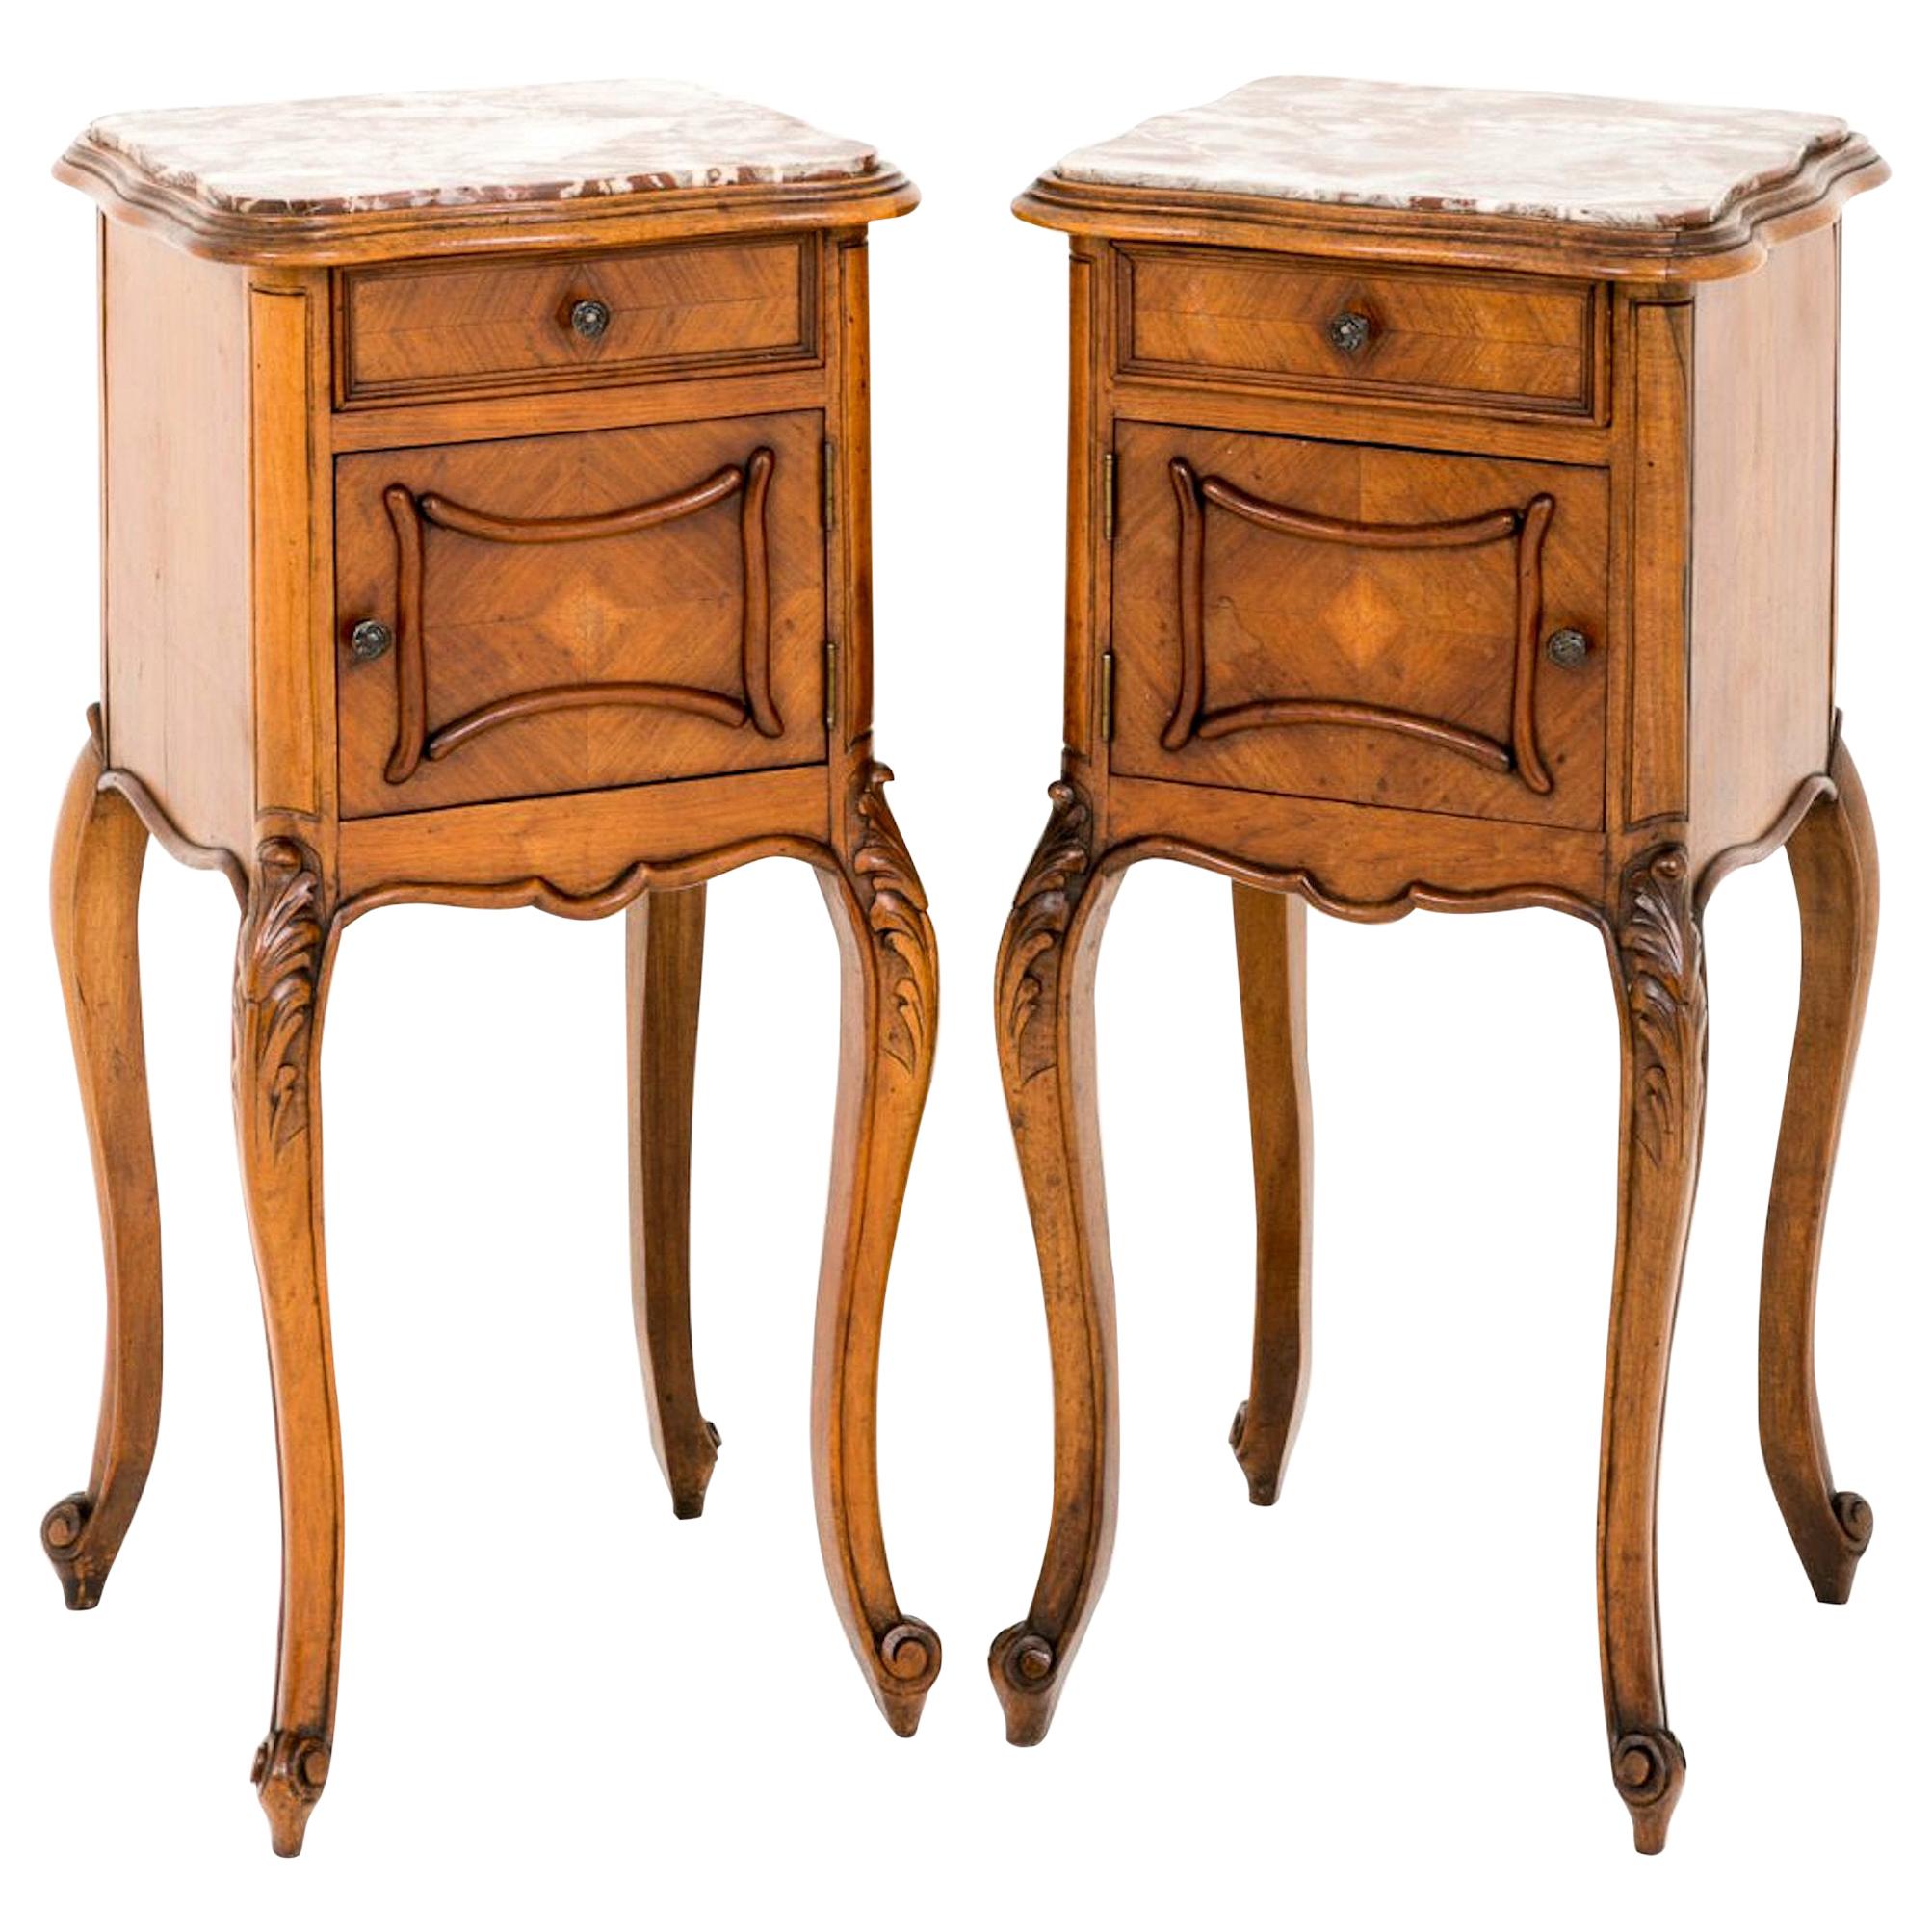 Pair of Early 20th Century Walnut Bedside Cabinets